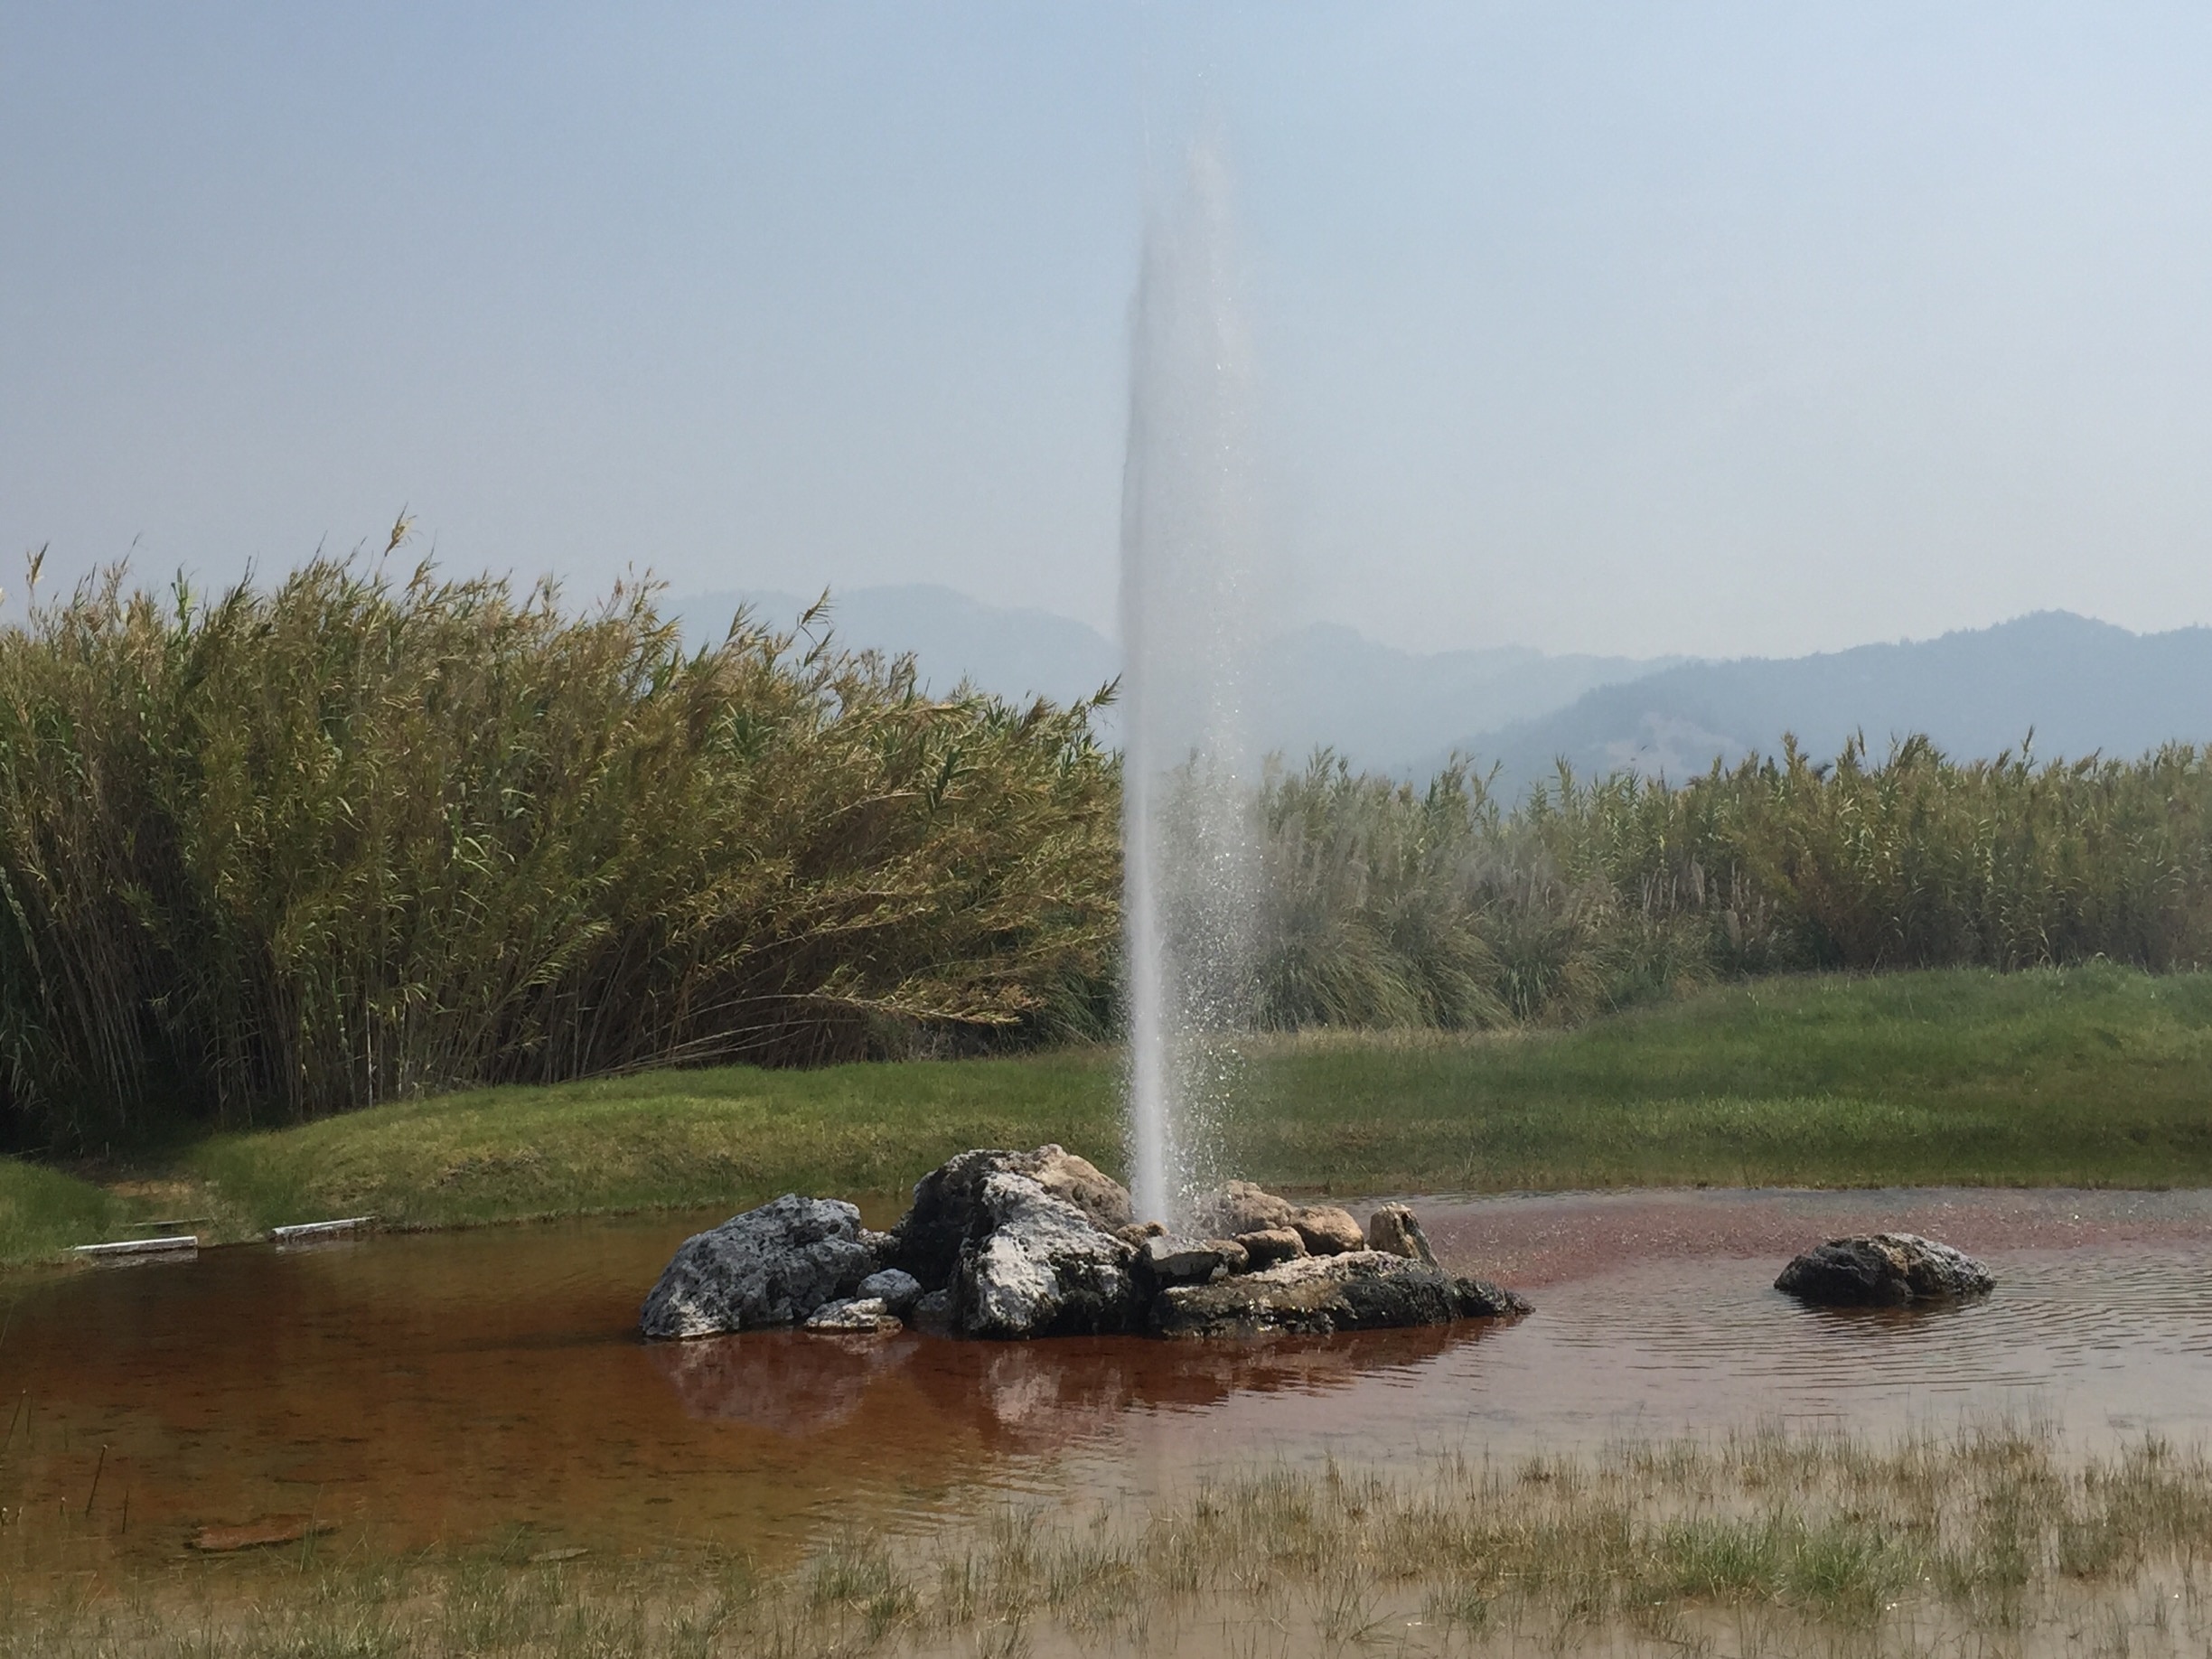 World famous Napa valley. This geyser is one of 3 in the world that consistently spouts. Some nearby trails, a petrified forest approximately 4 miles away and some roads to bike and tour... but most of all nestled in a beautiful valley that is world famous for its wines